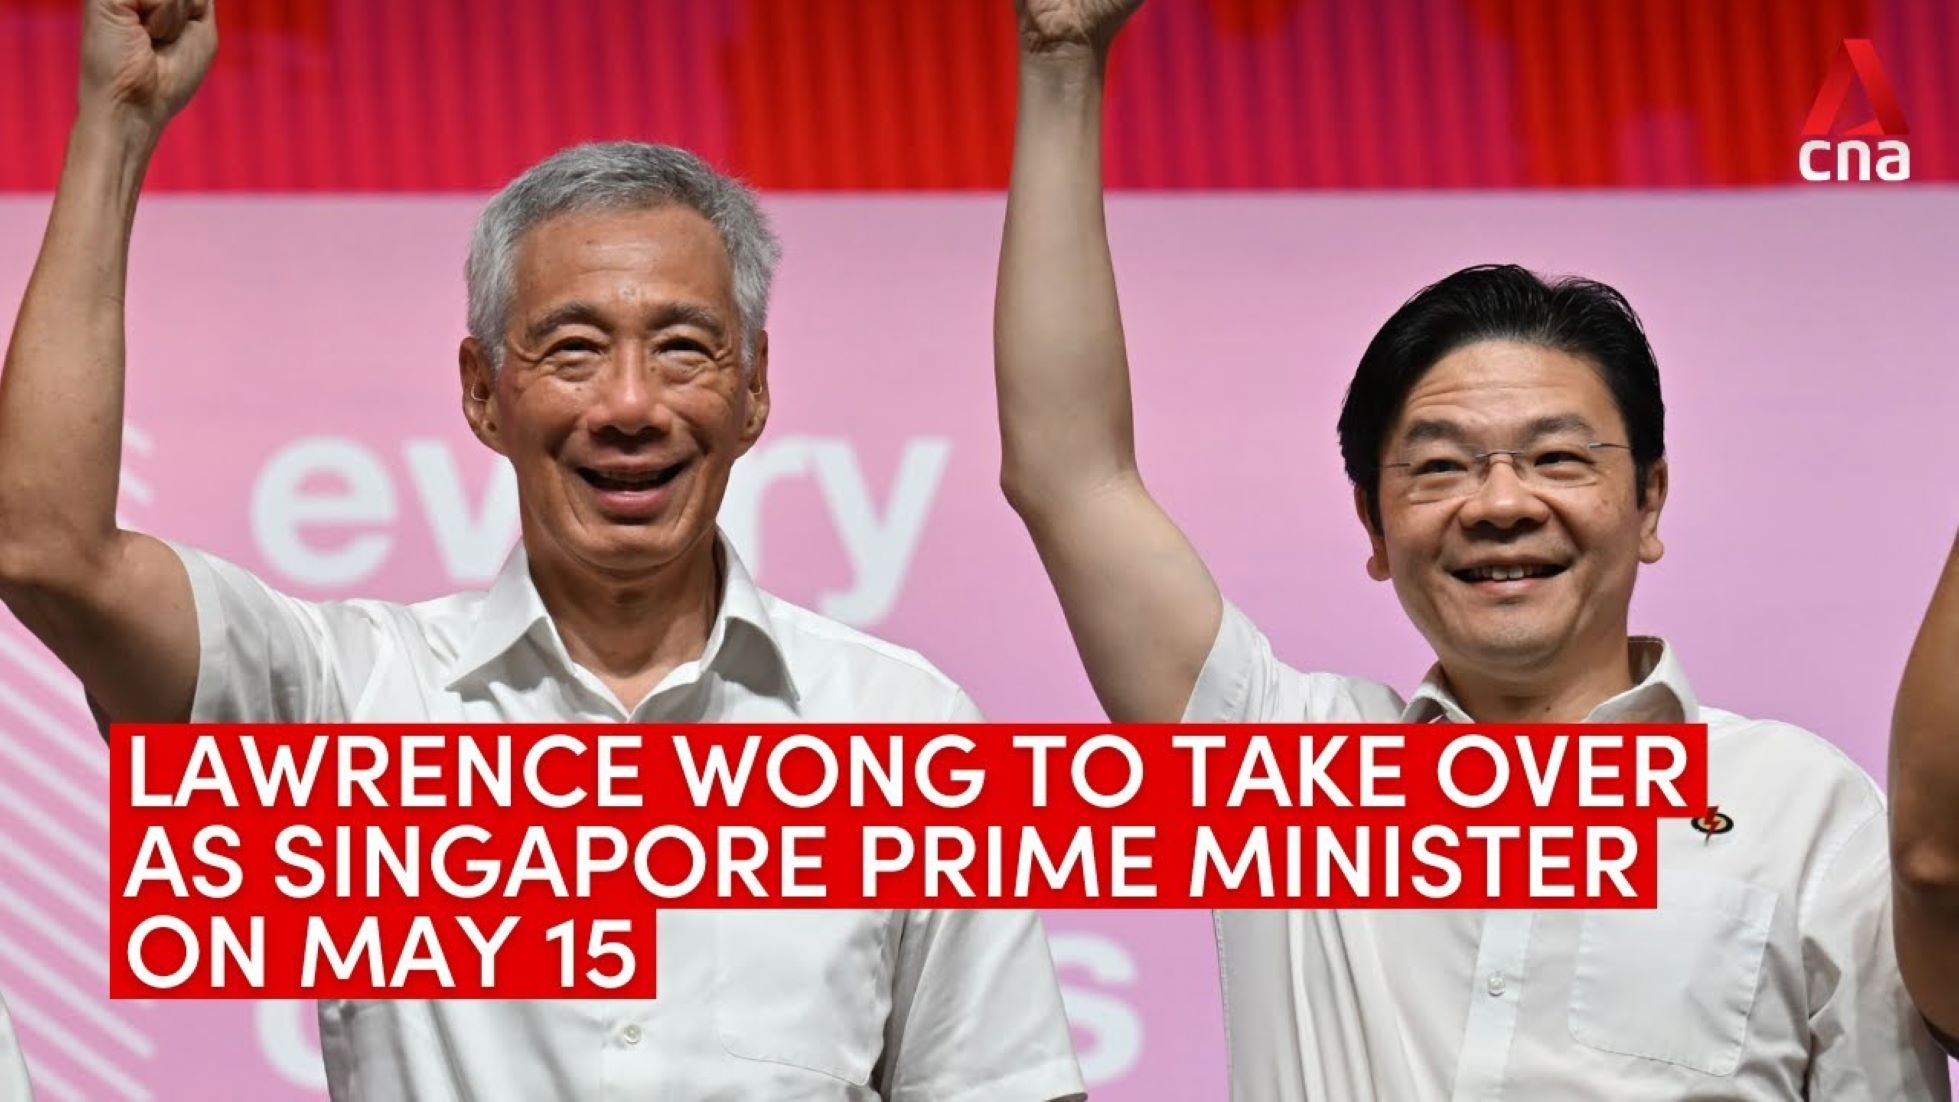 Lee Hsien Loong To Be Singapore Senior Minister In New Cabinet: Lawrence Wong